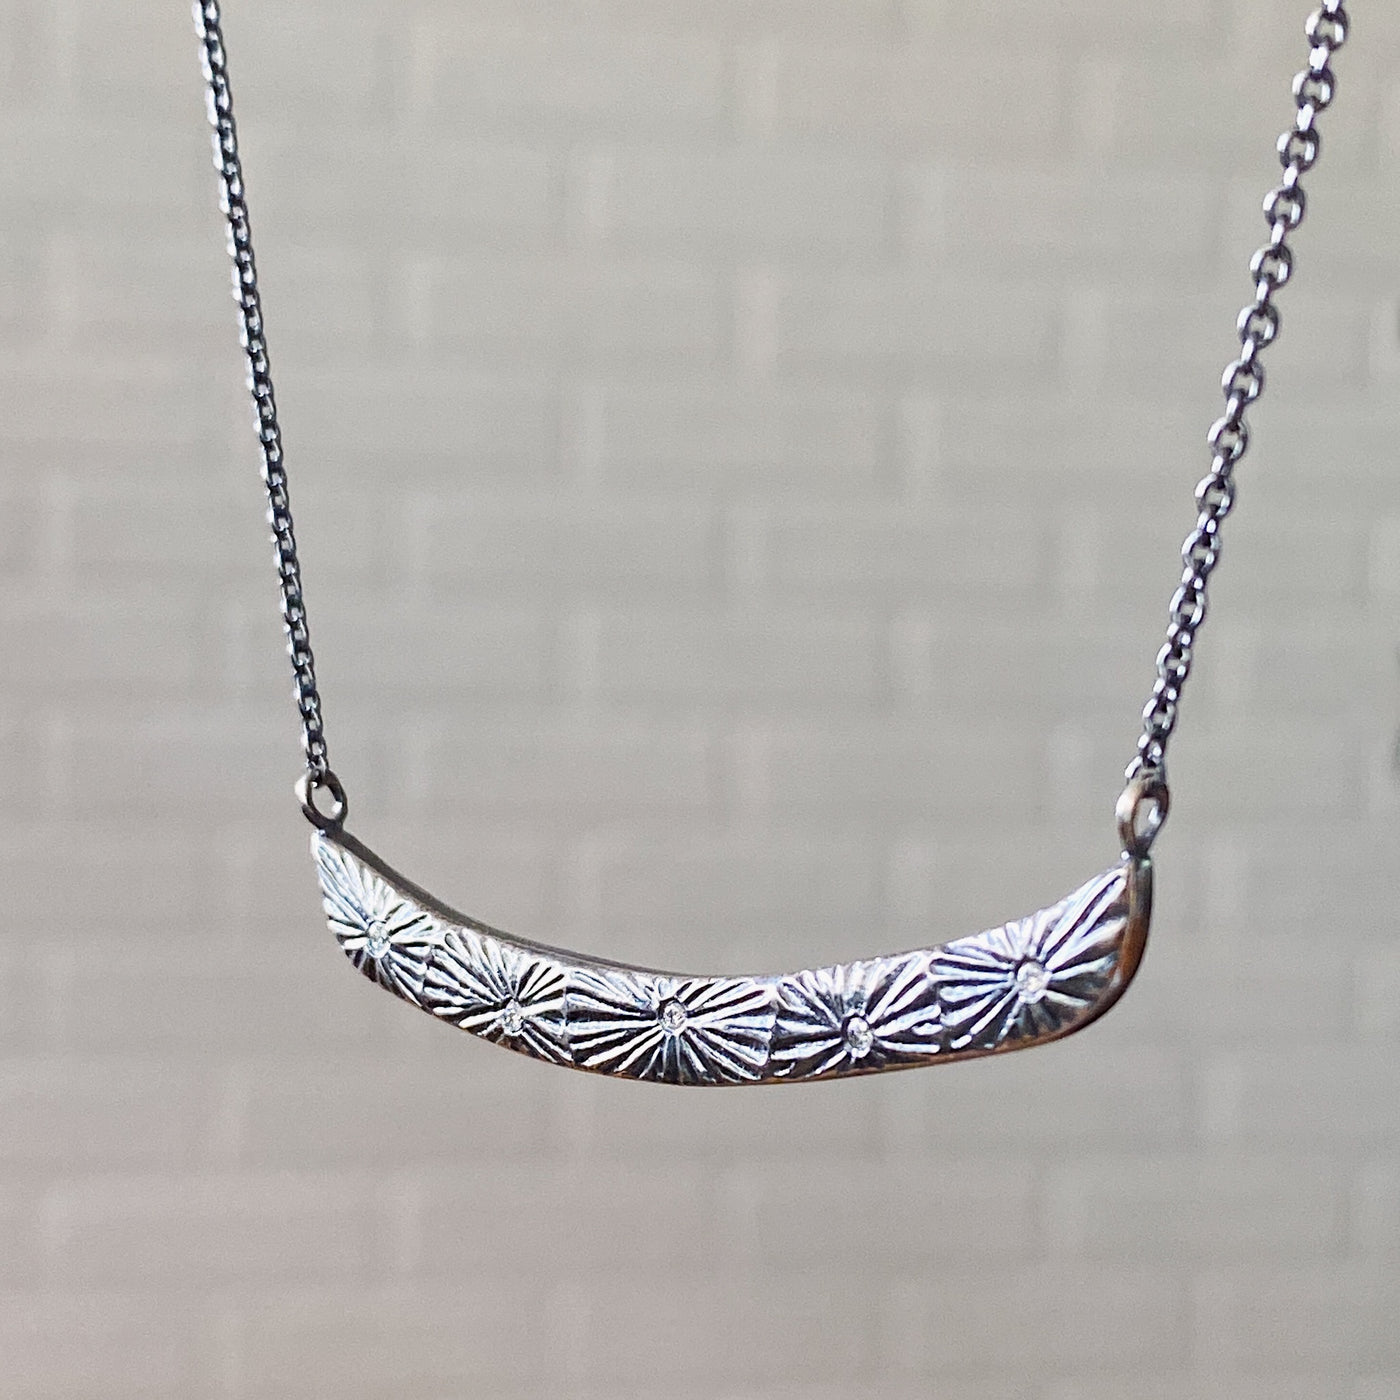 Oxidized Silver Luminous Bar Necklace by Corey Egan side view in daylight